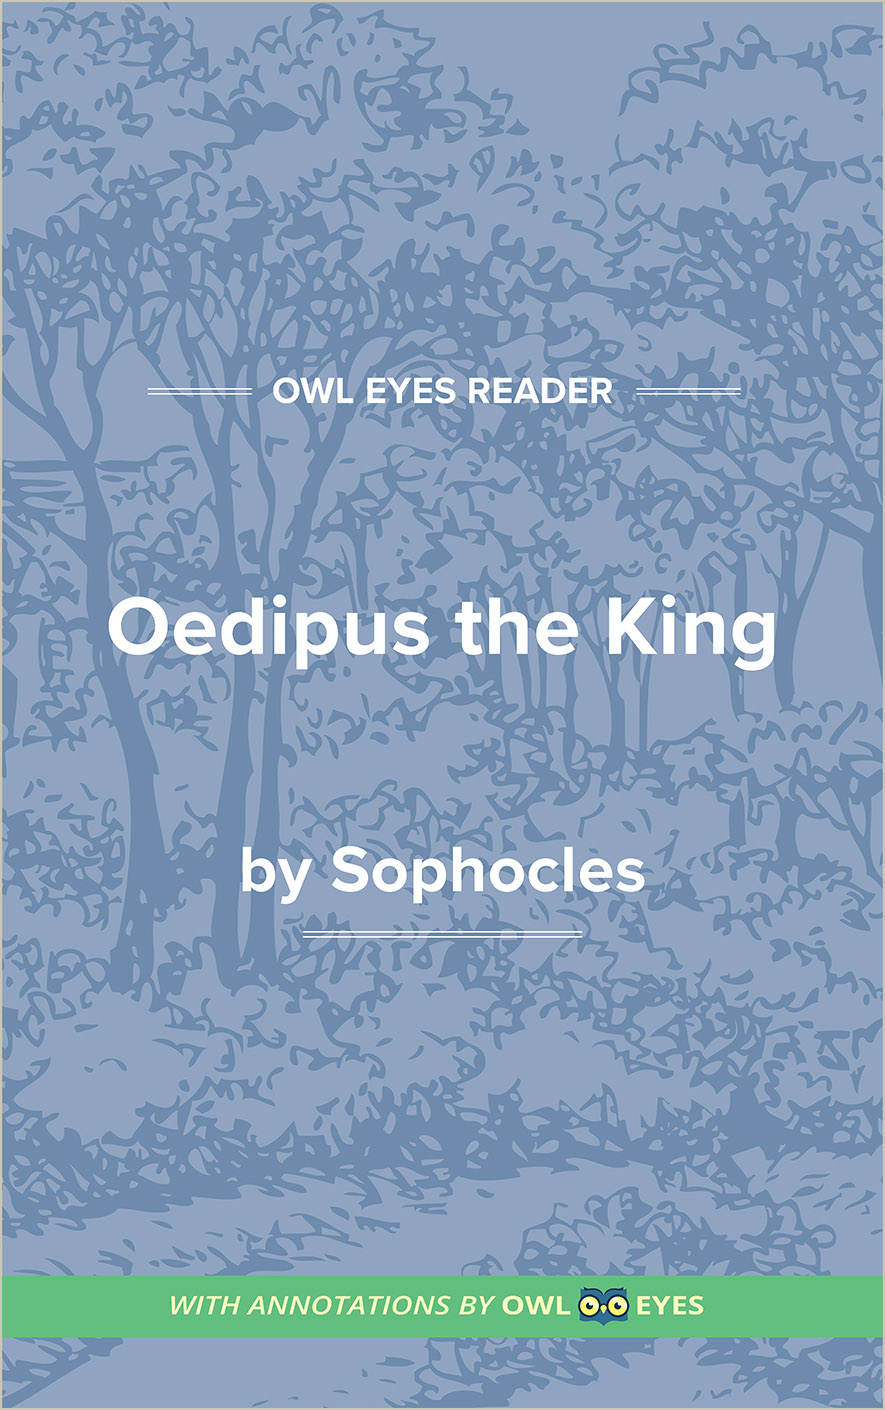 thesis statement for oedipus the king blindness